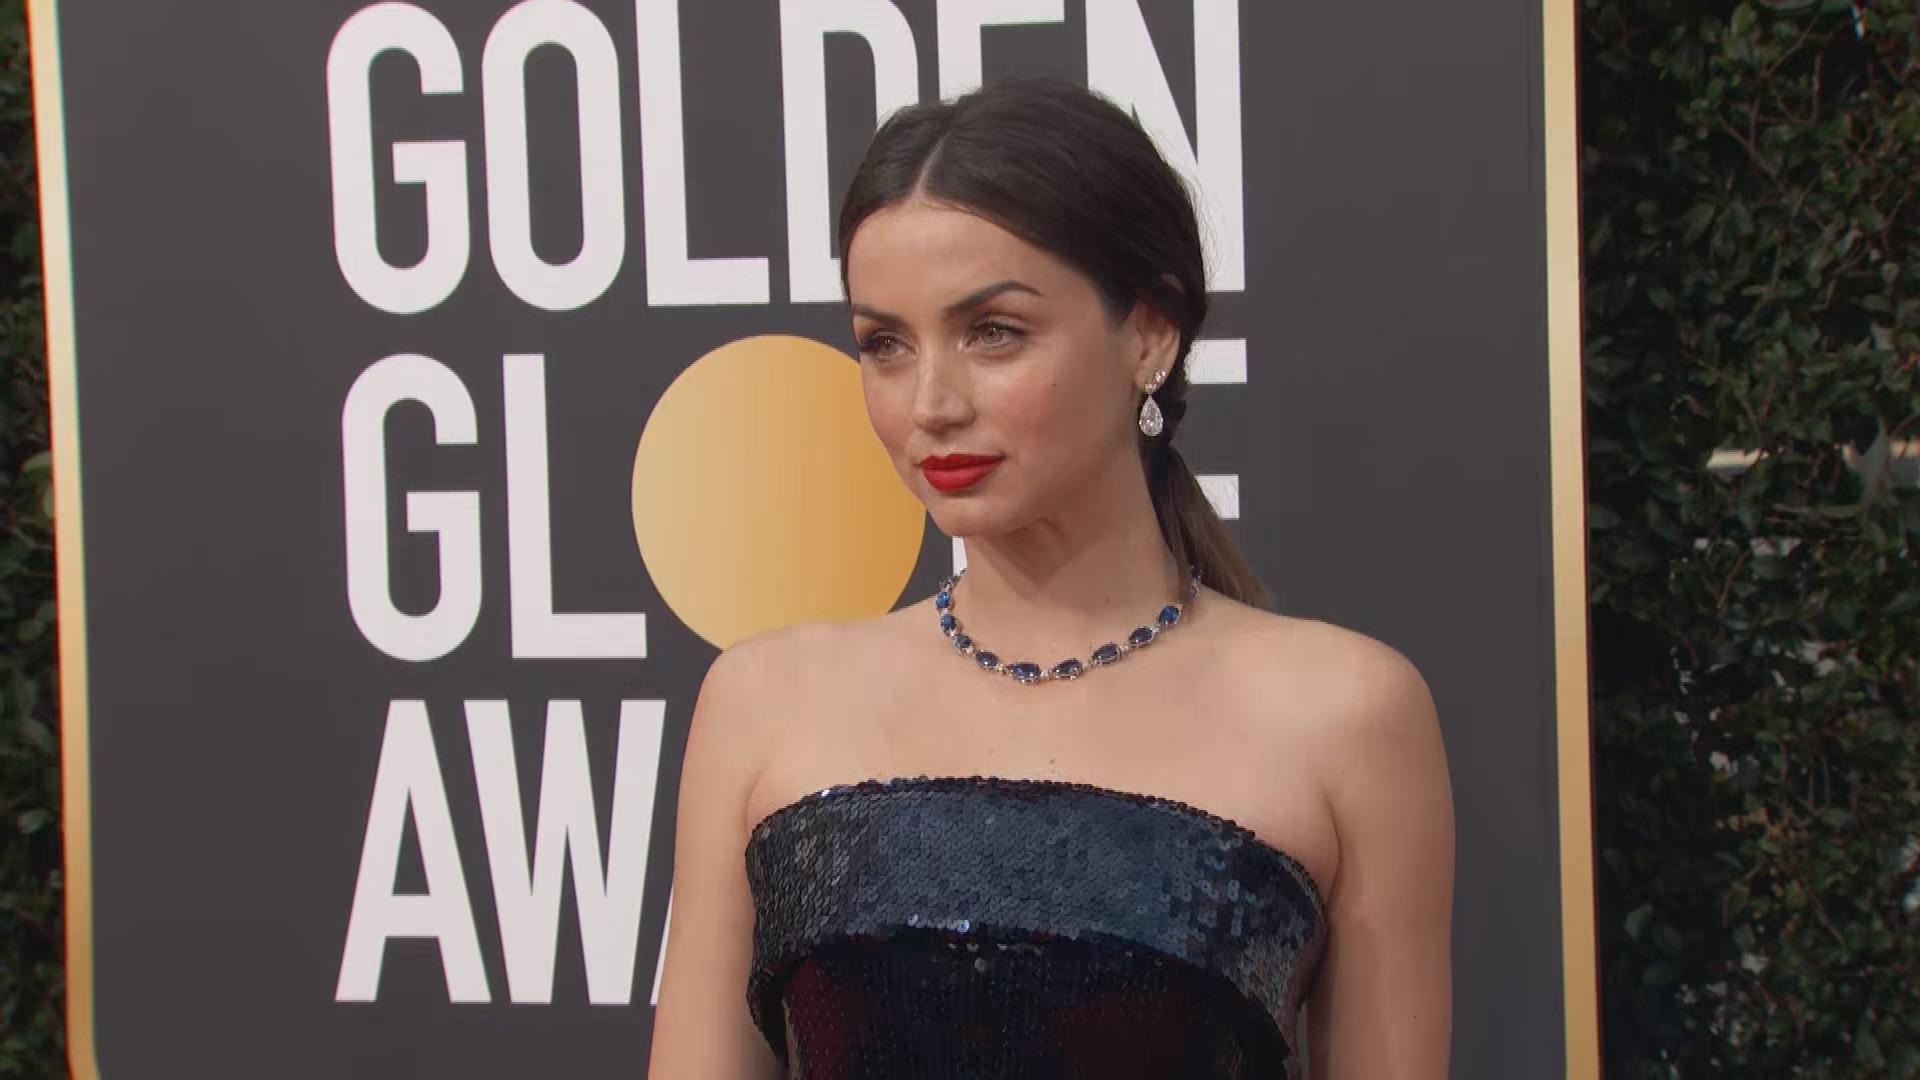 On The Red Carpet - JUST ANNOUNCED: Knives Out Movie actress Ana de Armas  will be presenting at the Golden Globes this Sunday! Stay tuned to our  socials for all your awards